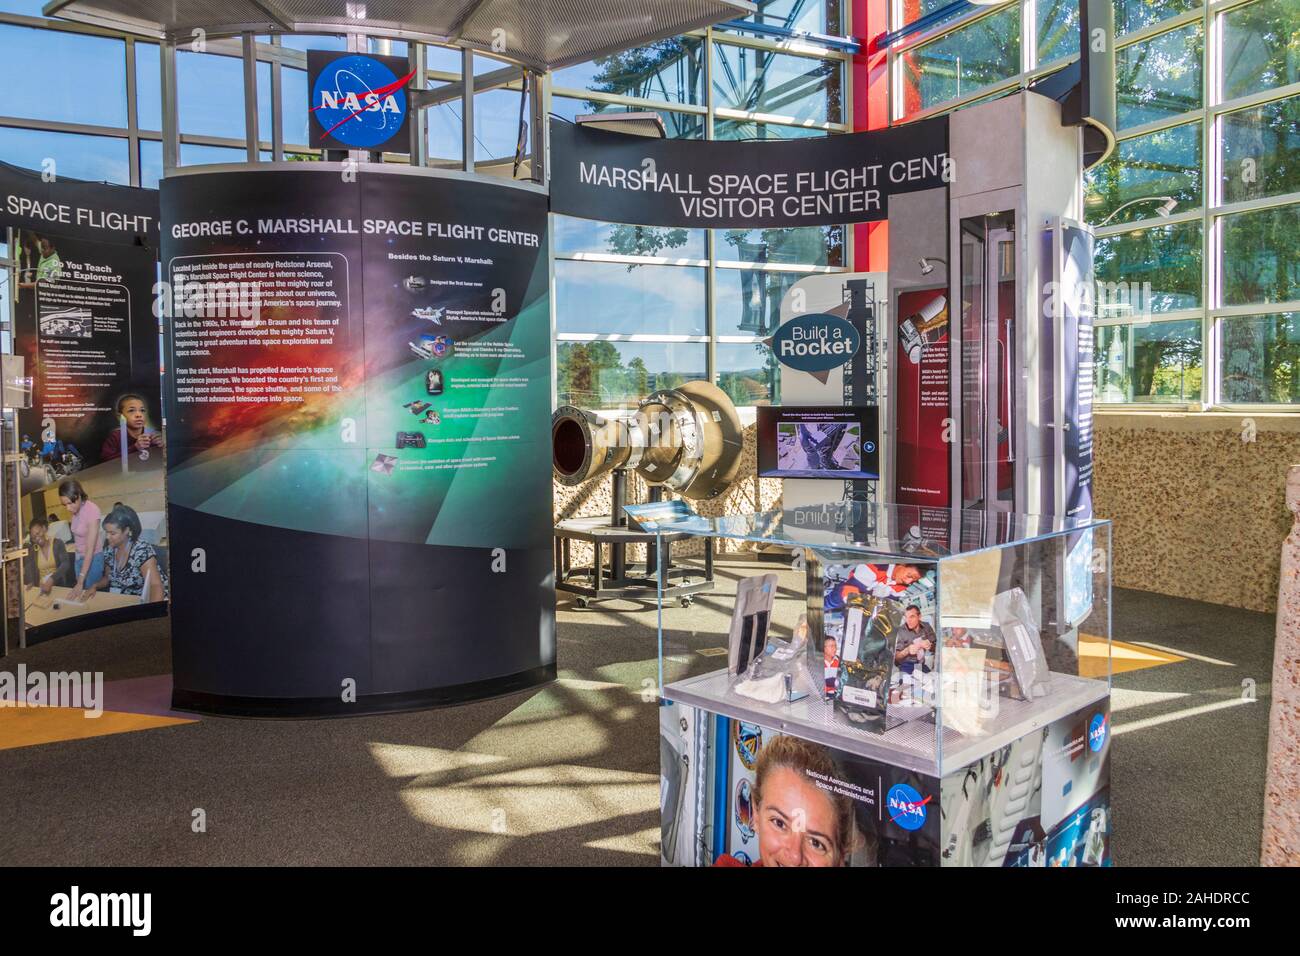 U.S. Space and Rocket Center Museum at Marshall Space Flight Center in Huntsville, Alabama. Stock Photo